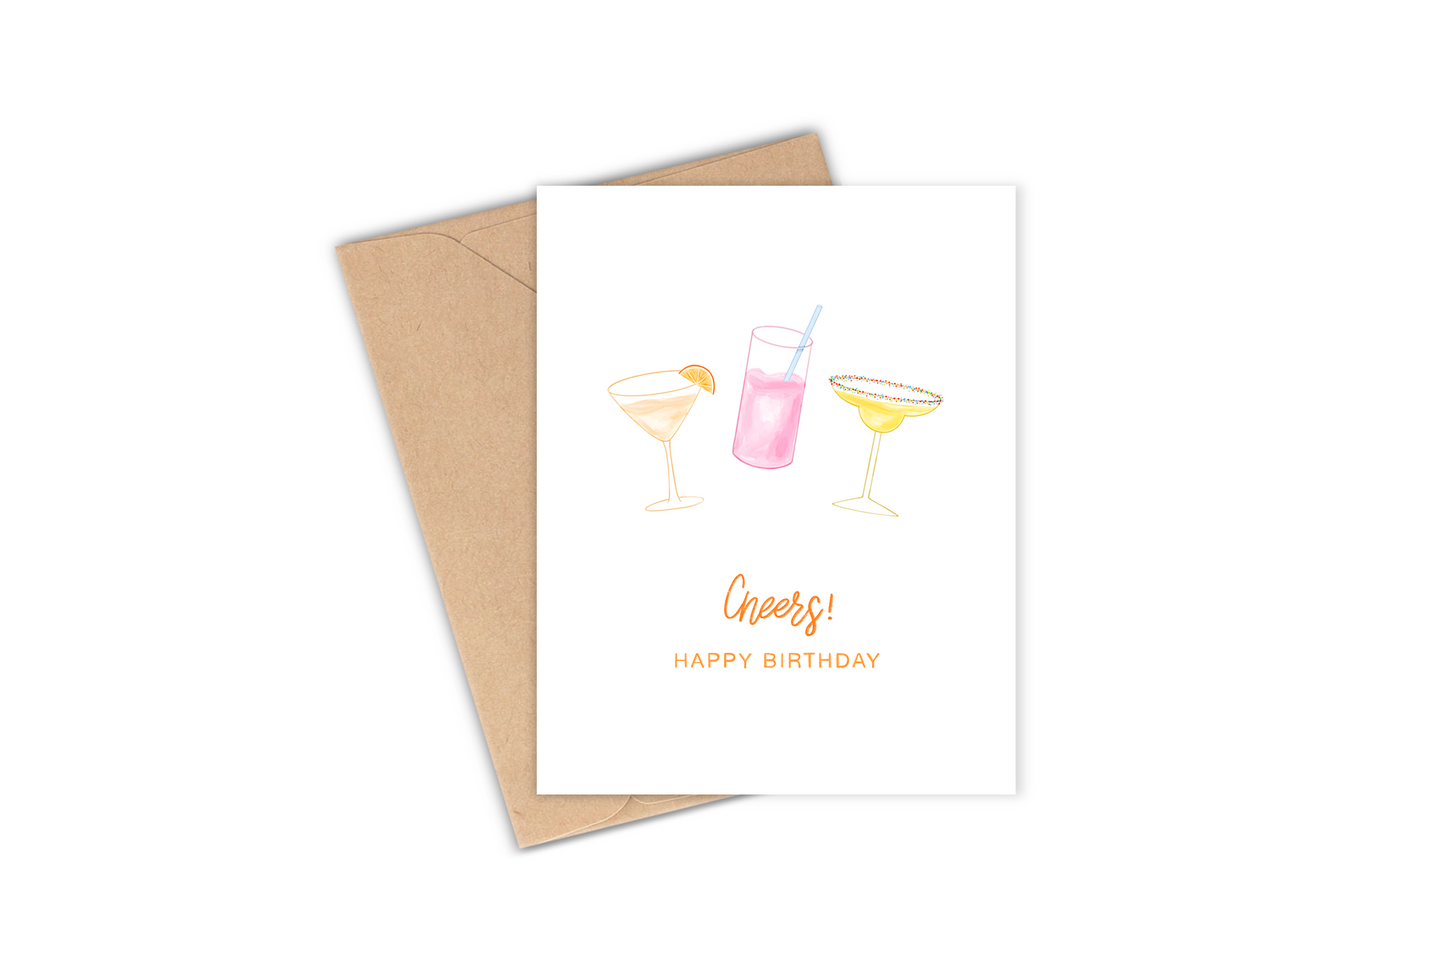 Nothing says happy birthday like a few fun and fancy cocktails! This Greeting card features a drawing of 3 cocktails with the phrase "Cheers! Happy birthday". I highly recommend pairing it with your favorite bottle of alcohol or a cocktail or two!